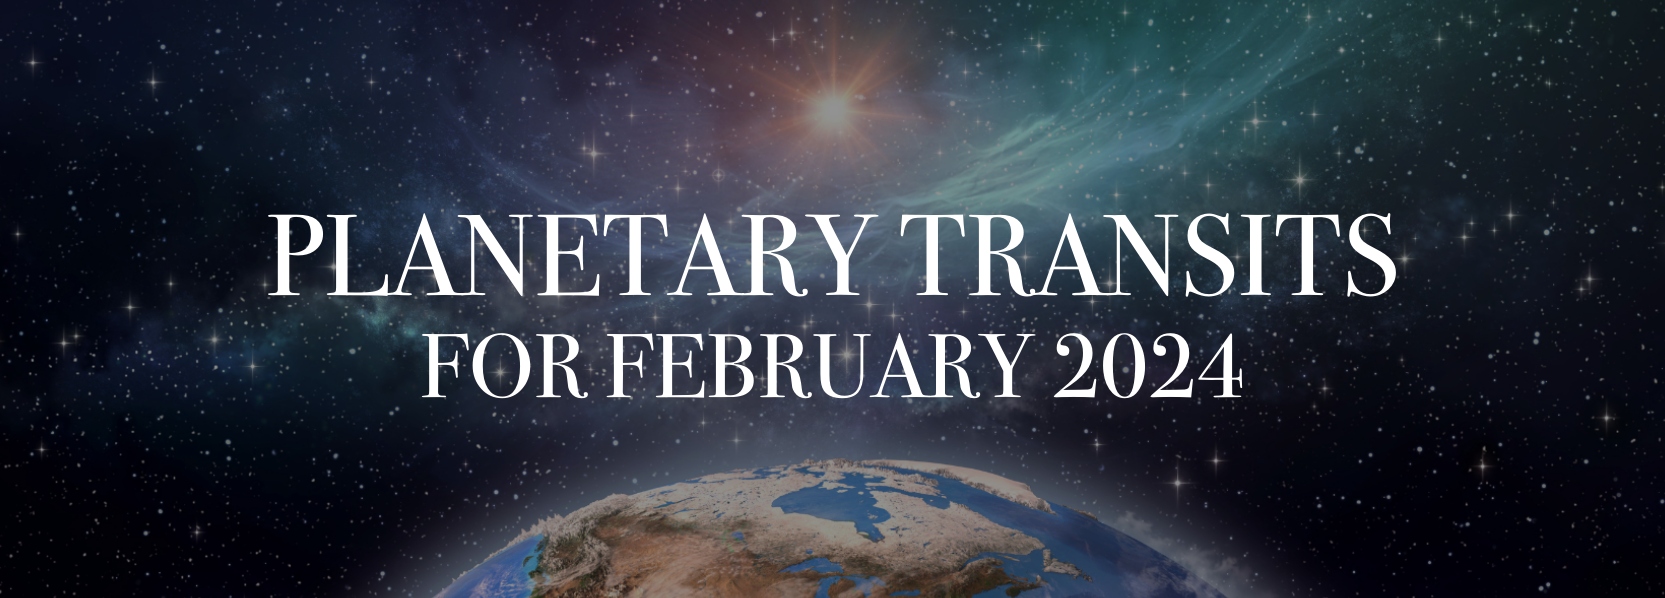 PLANETARY TRANSITS FOR FEBRUARY 2024